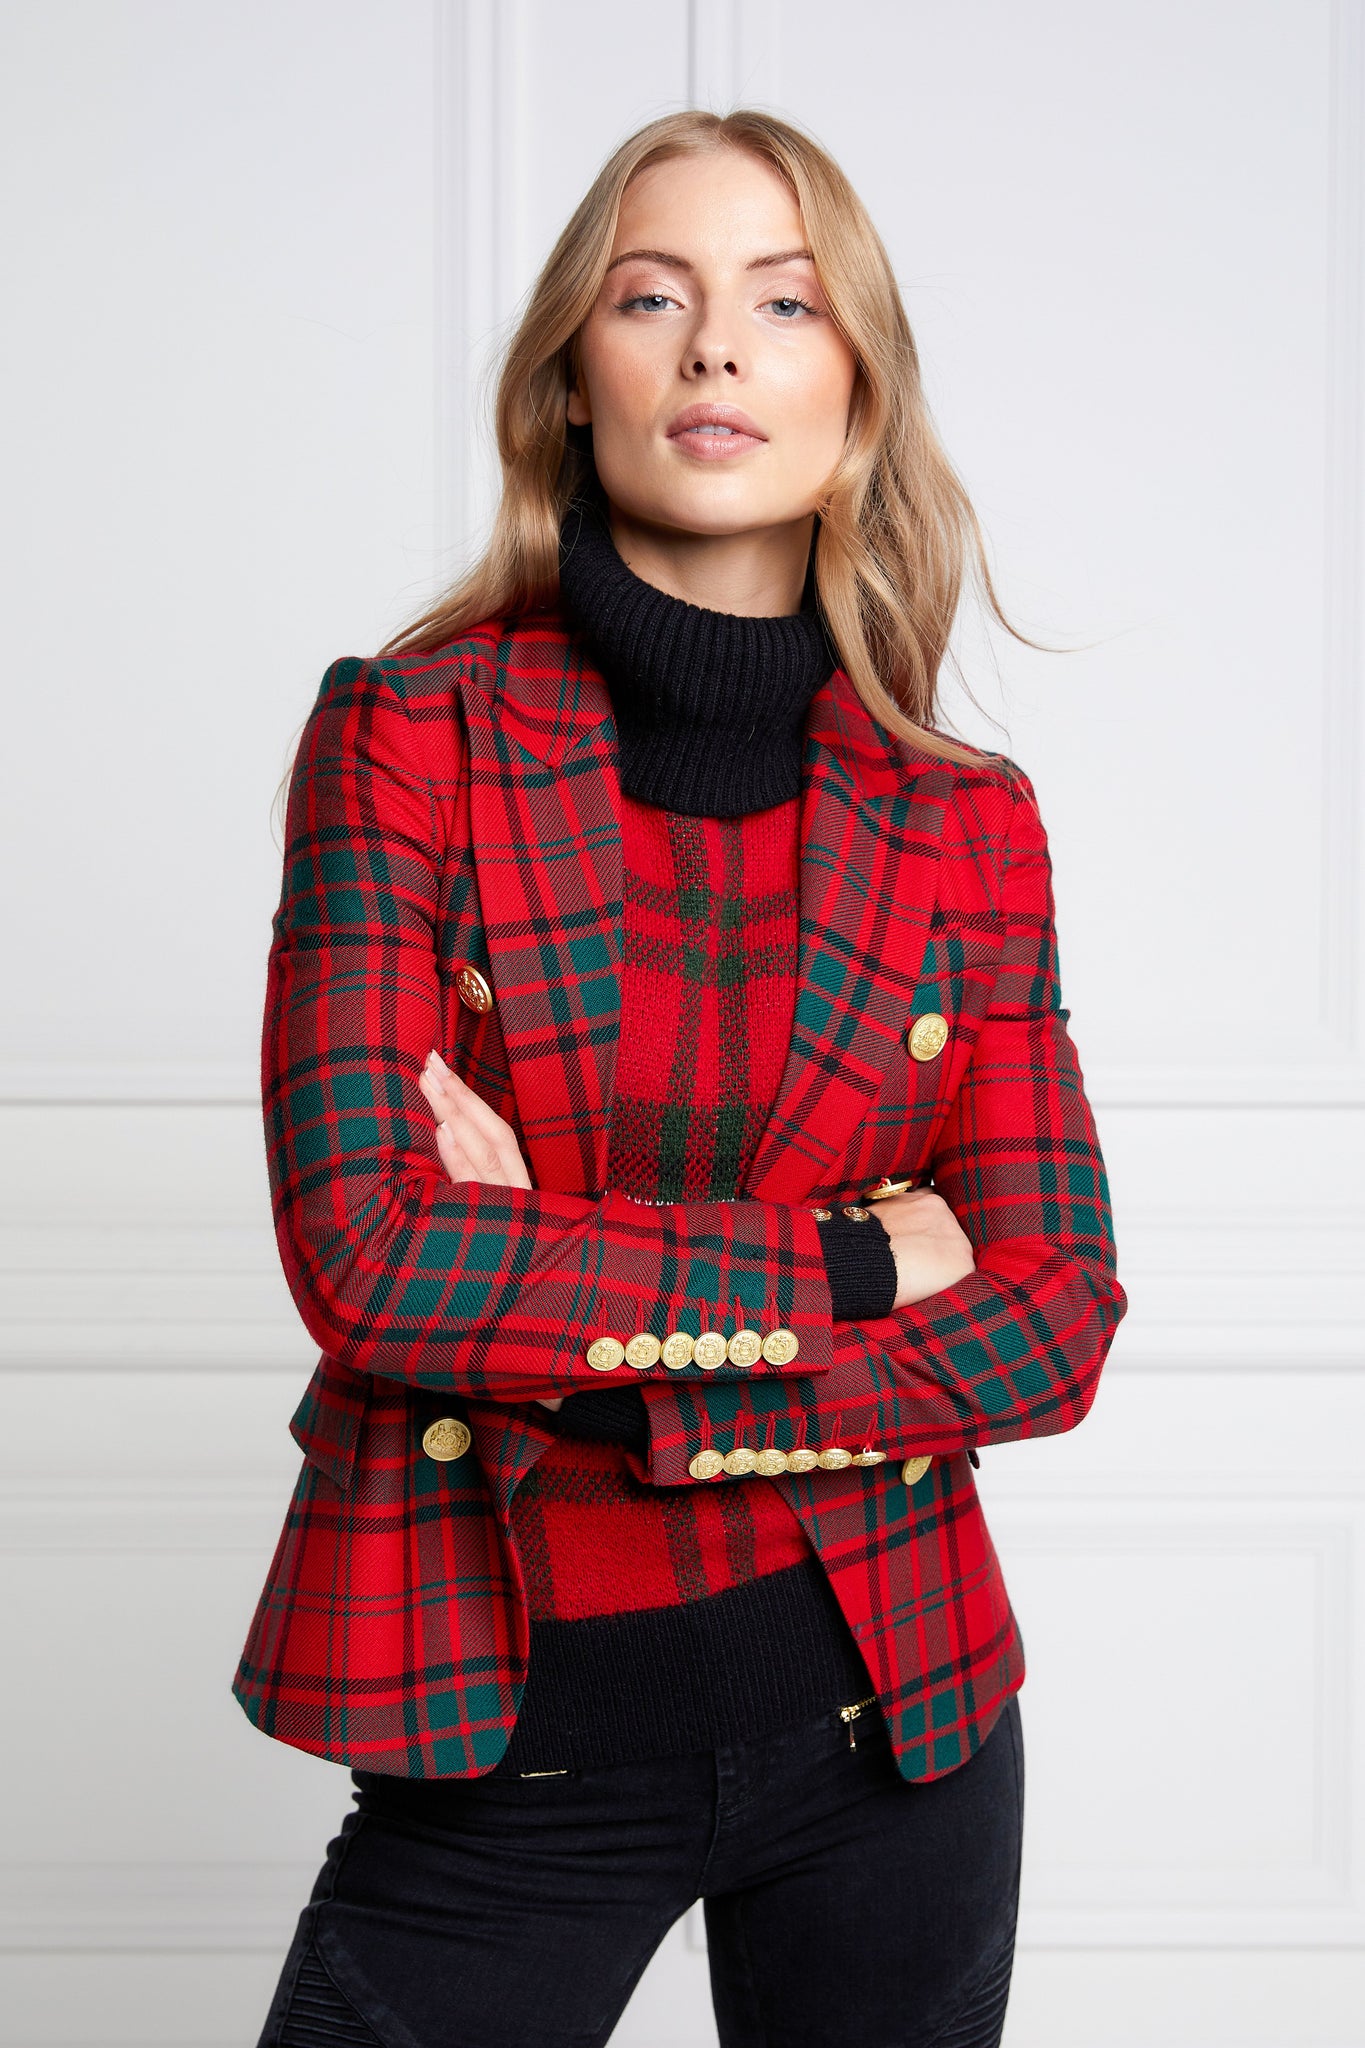 British made double breasted blazer that fastens with a single button hole to create a more form fitting silhouette with two pockets and gold button detailing this blazer is made from red and green tartan